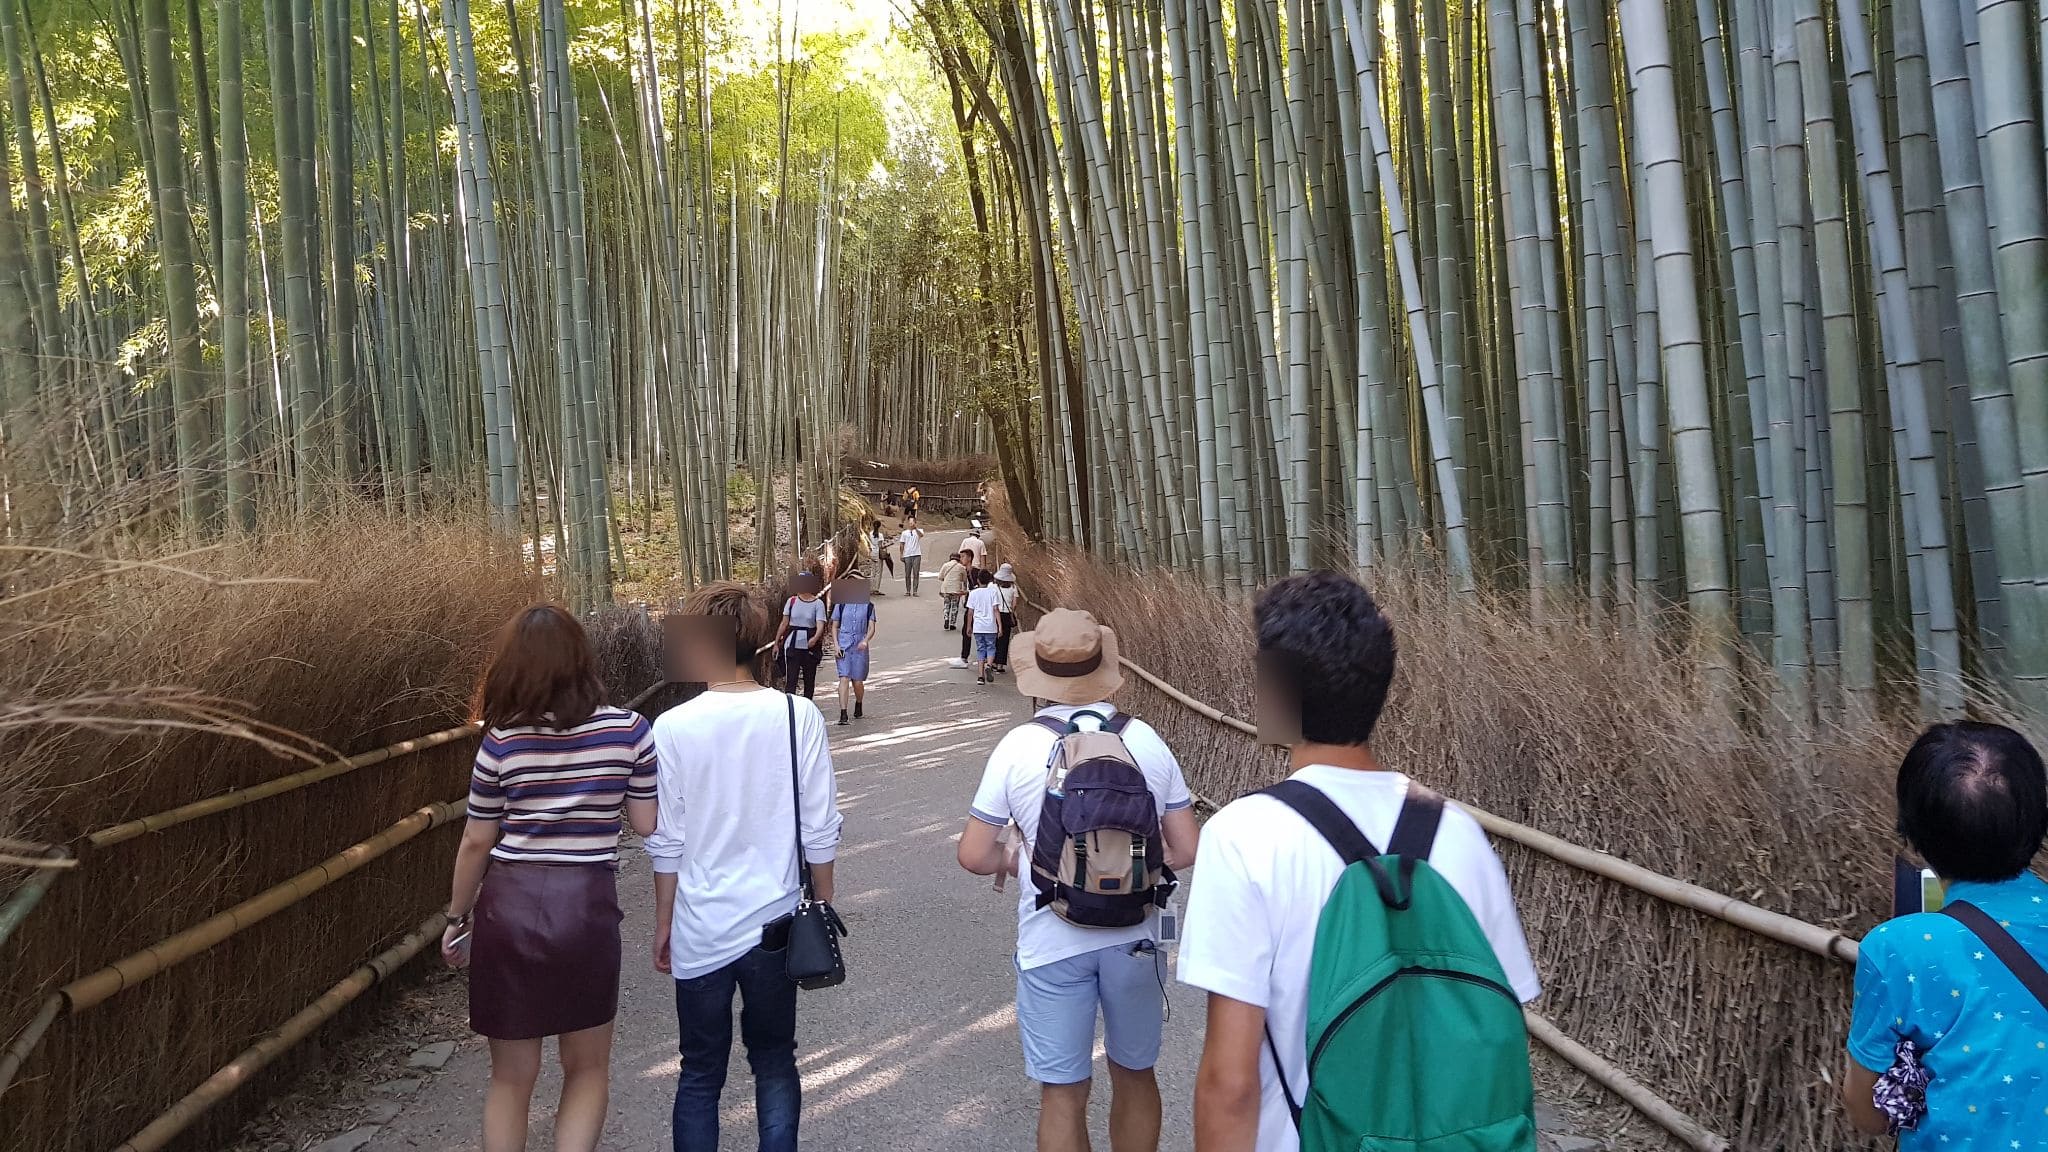 Bamboo Forest - Kyoto, Japan